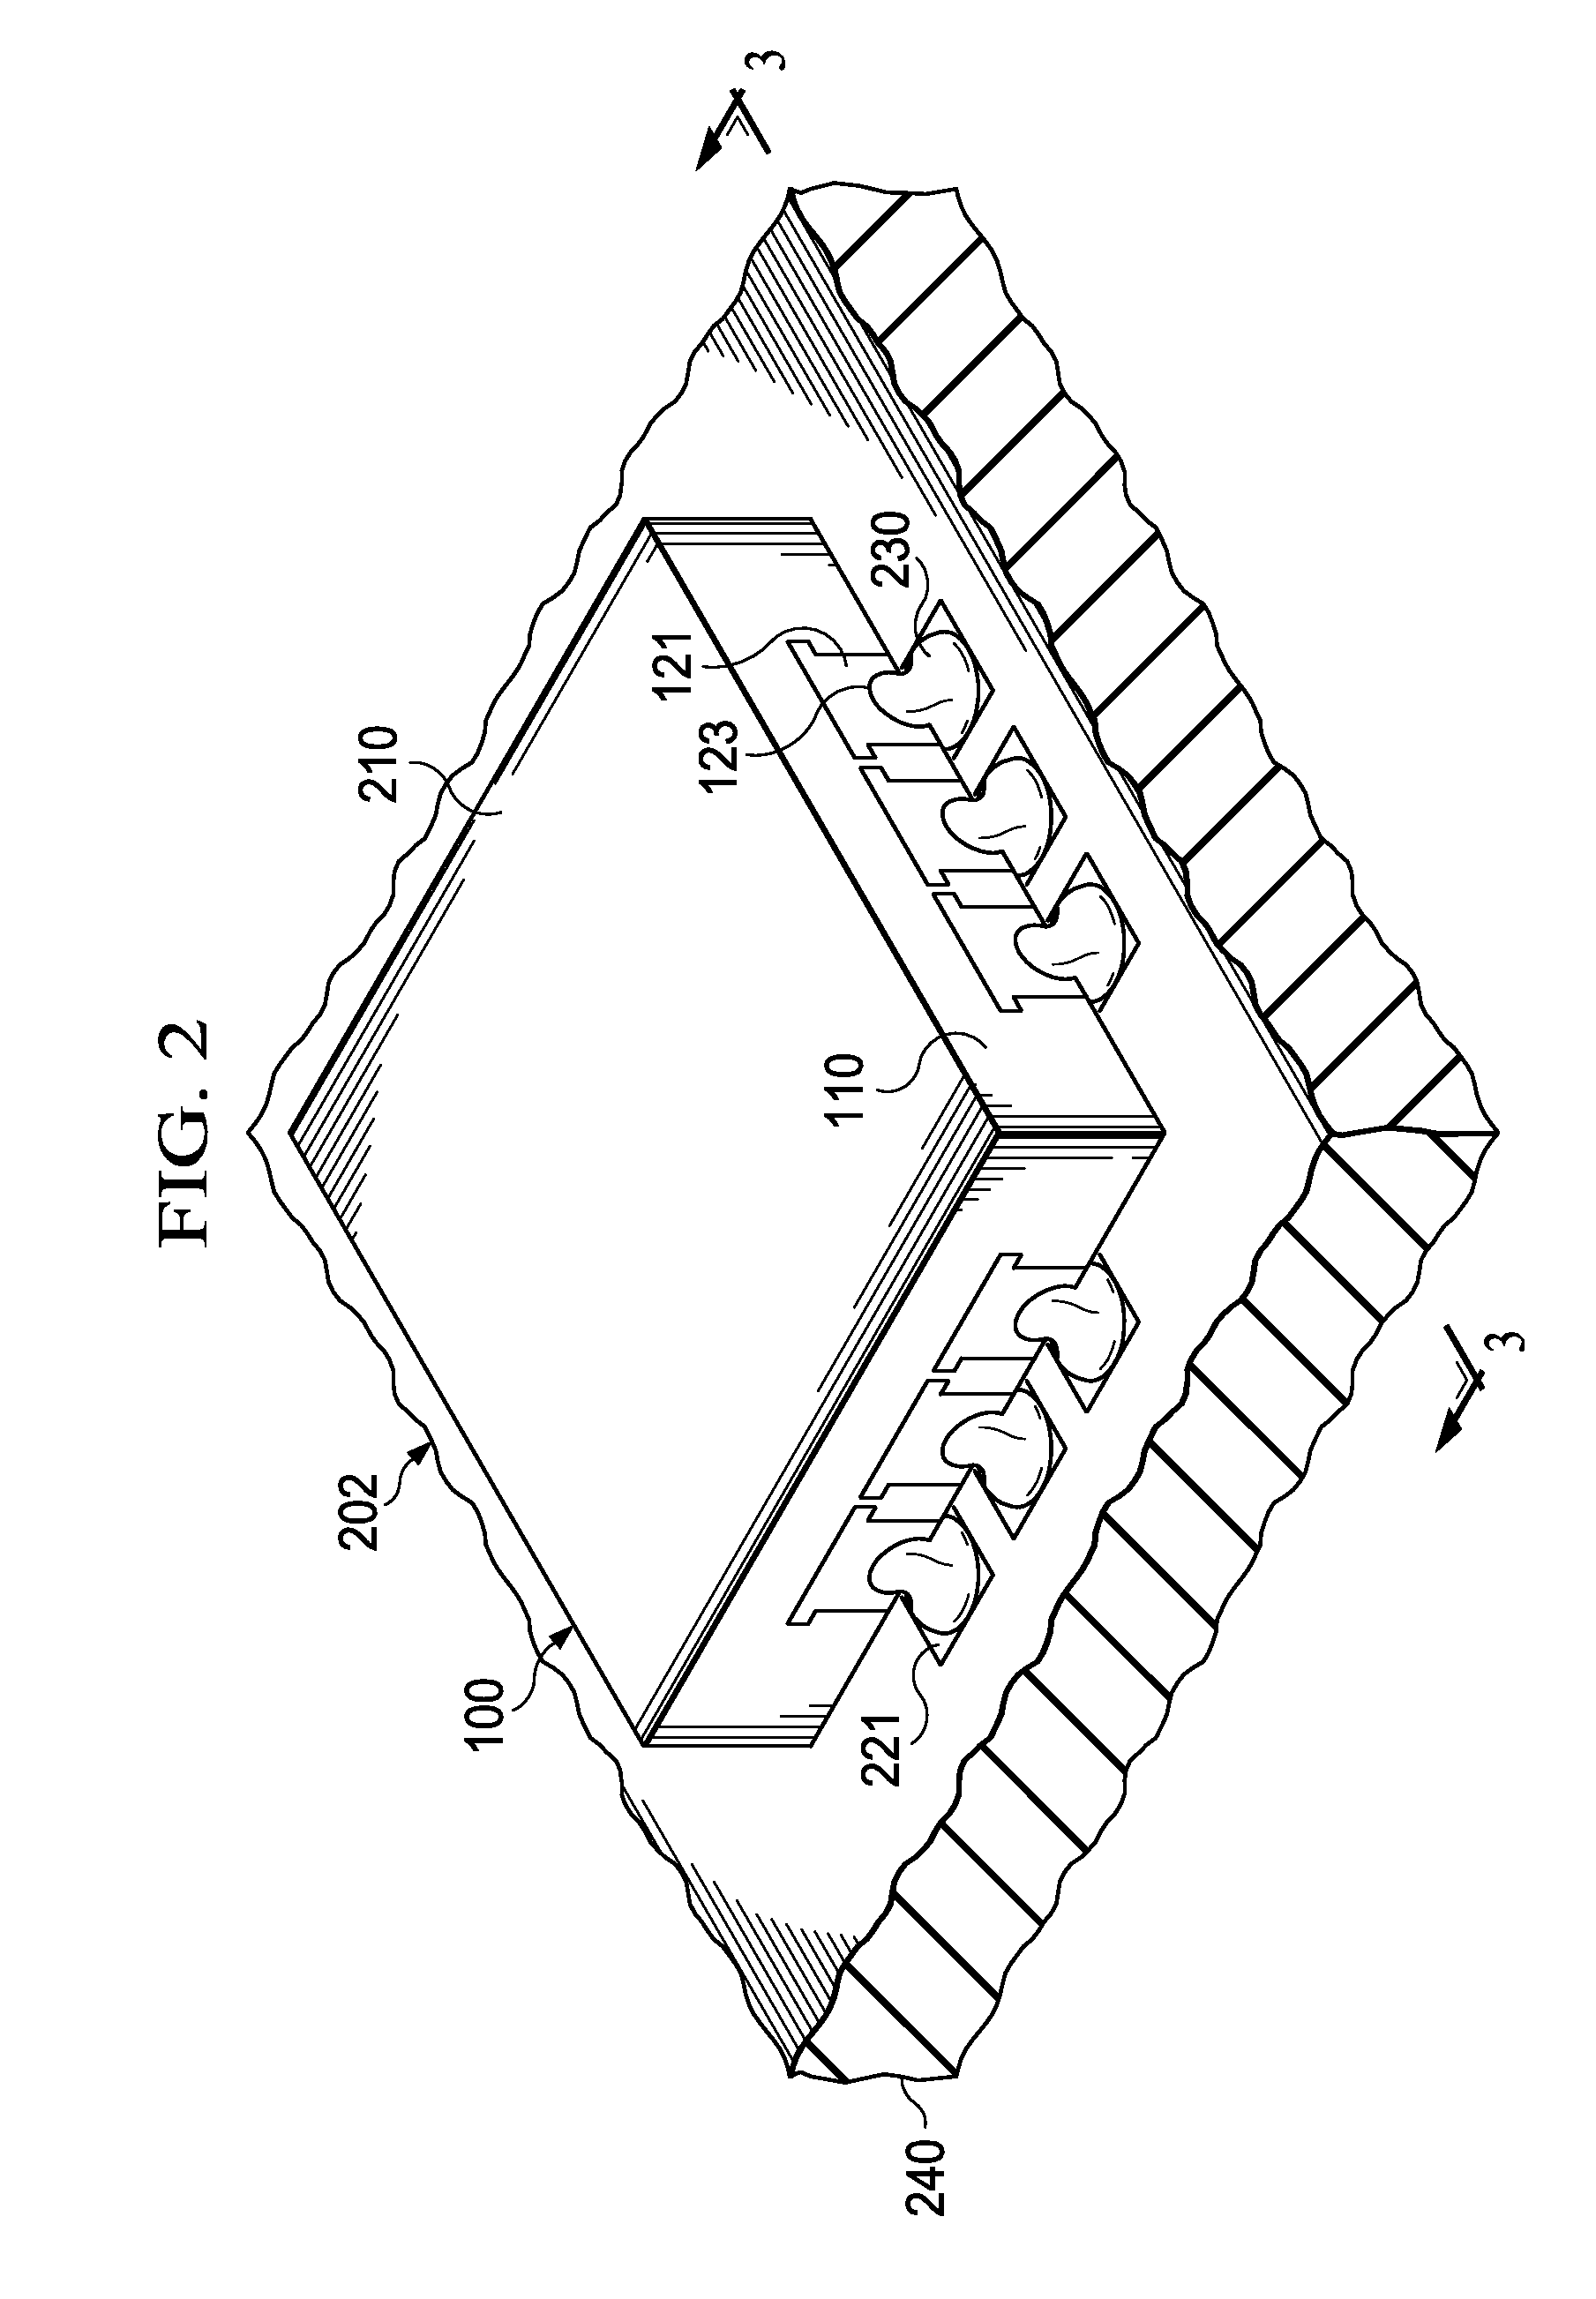 Semiconductor Package Leads Having Grooved Contact Areas